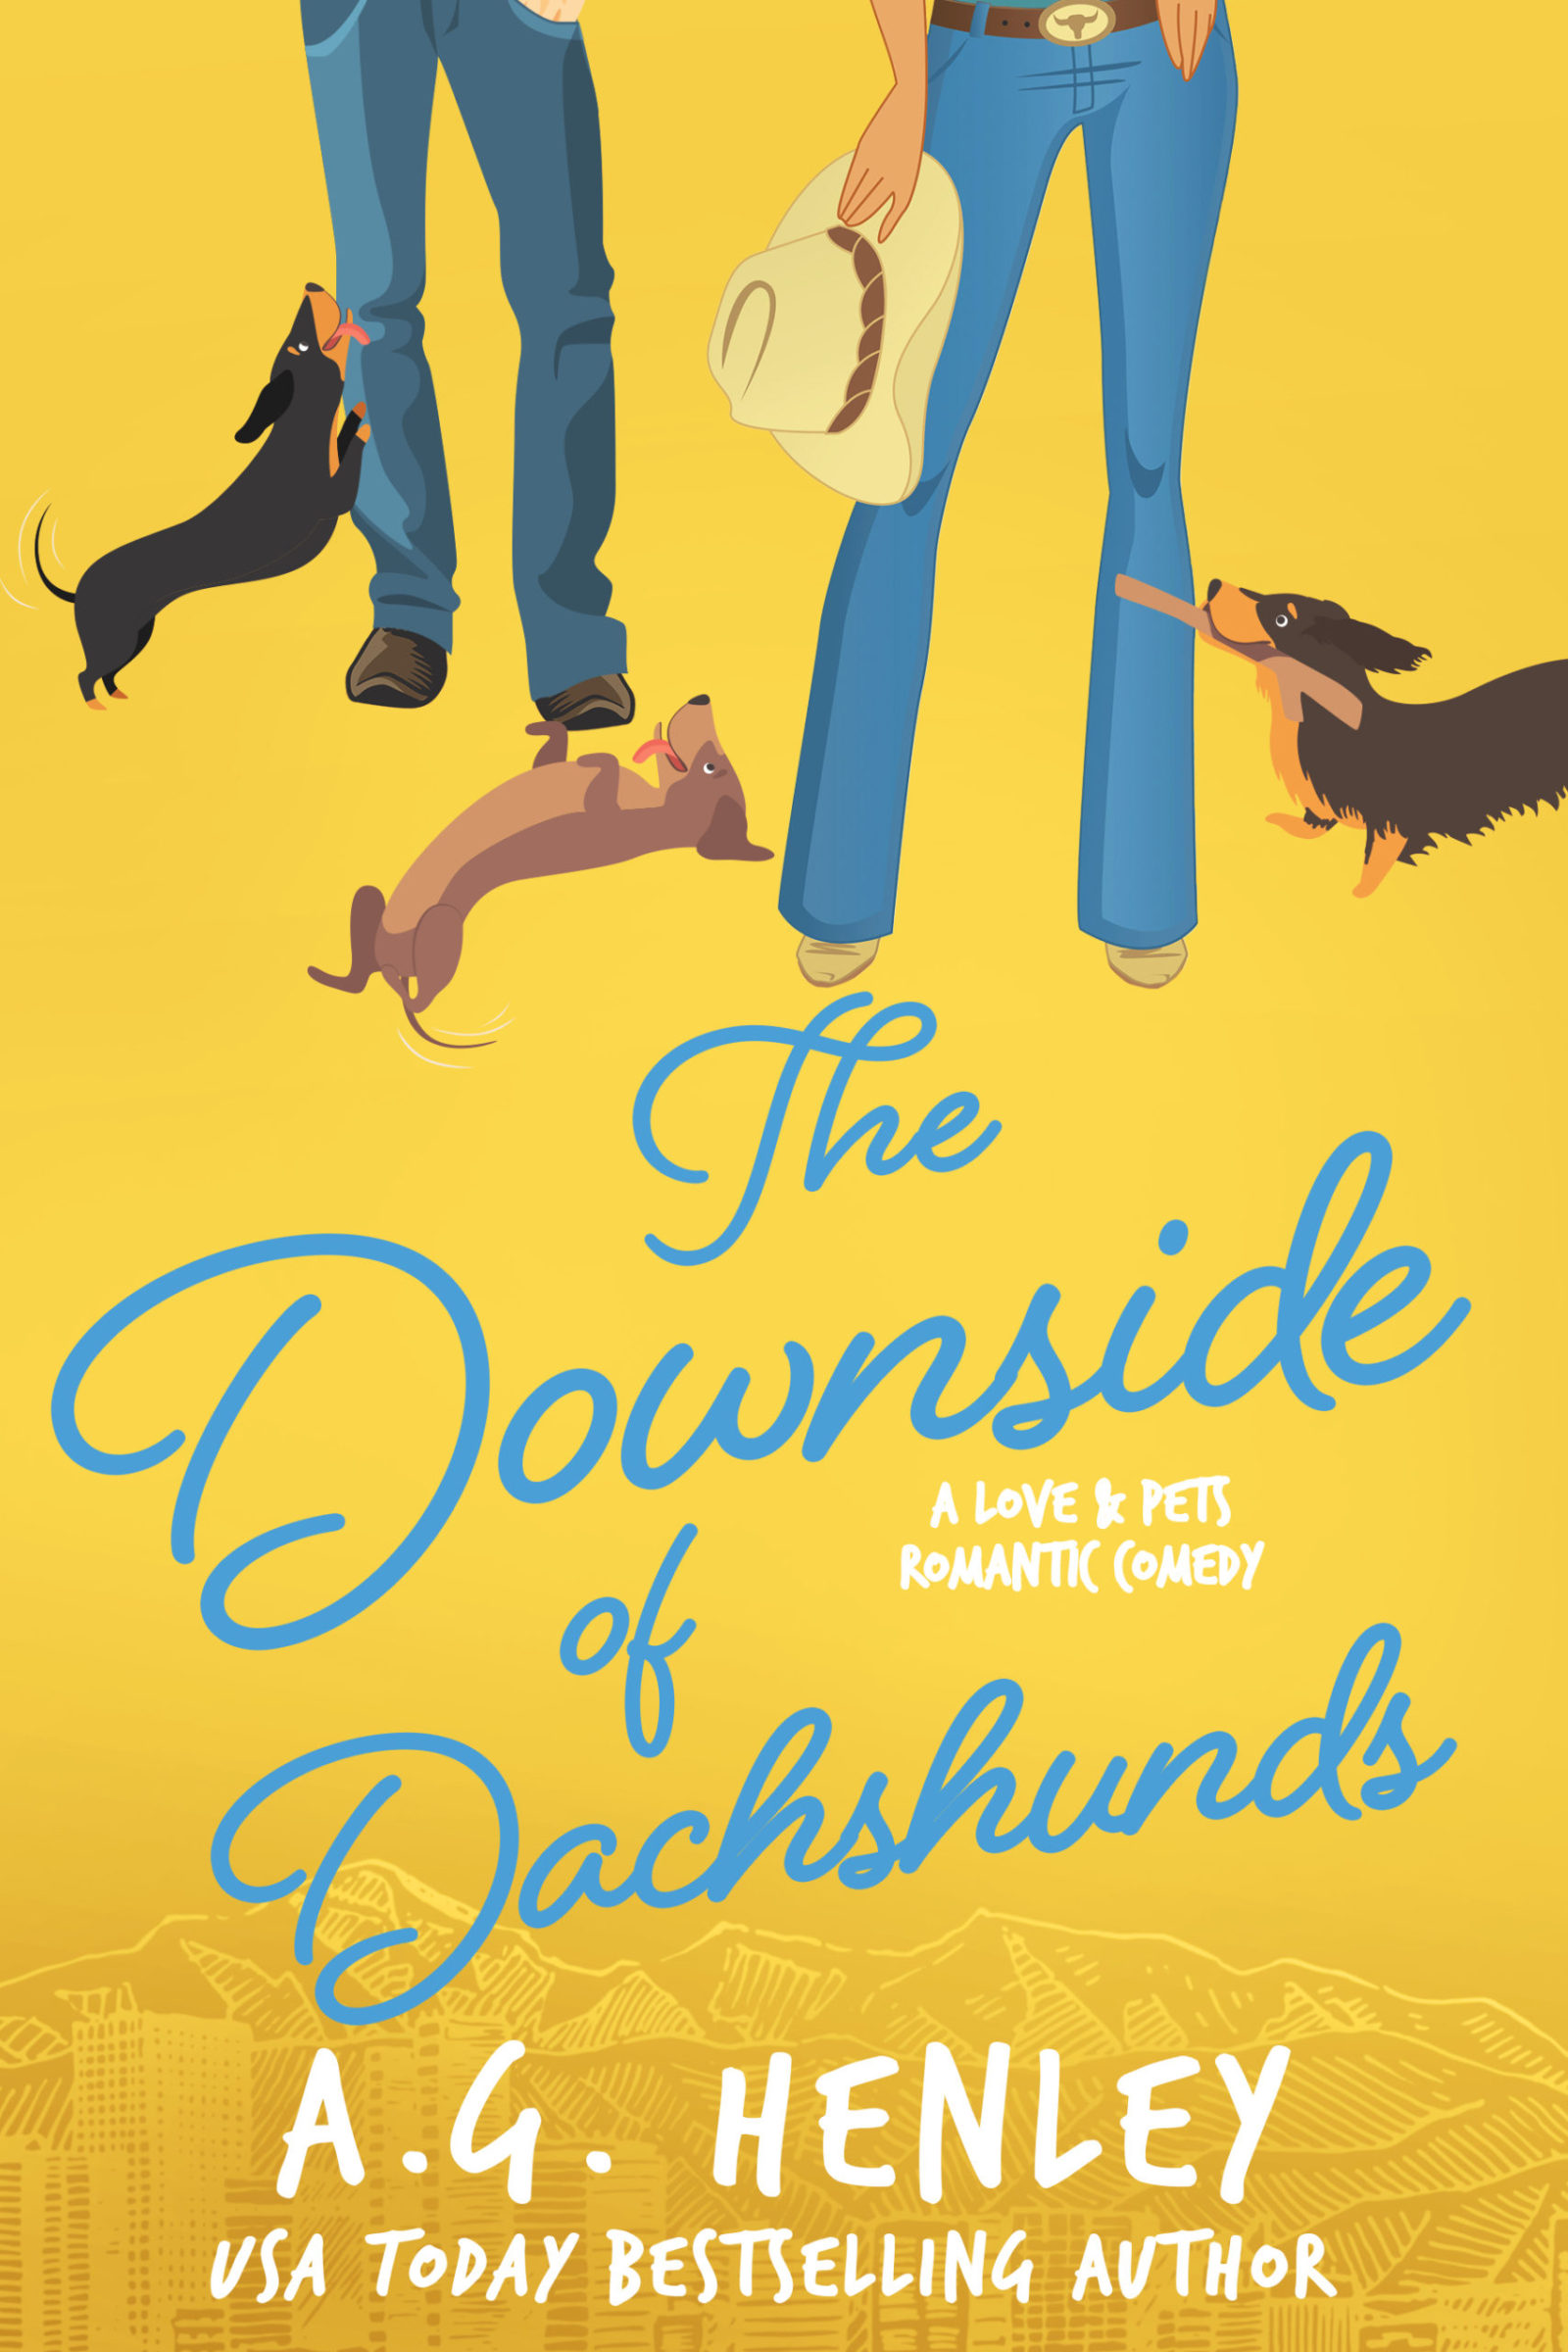 The Downside of Dachshunds (Love & Pets #3)